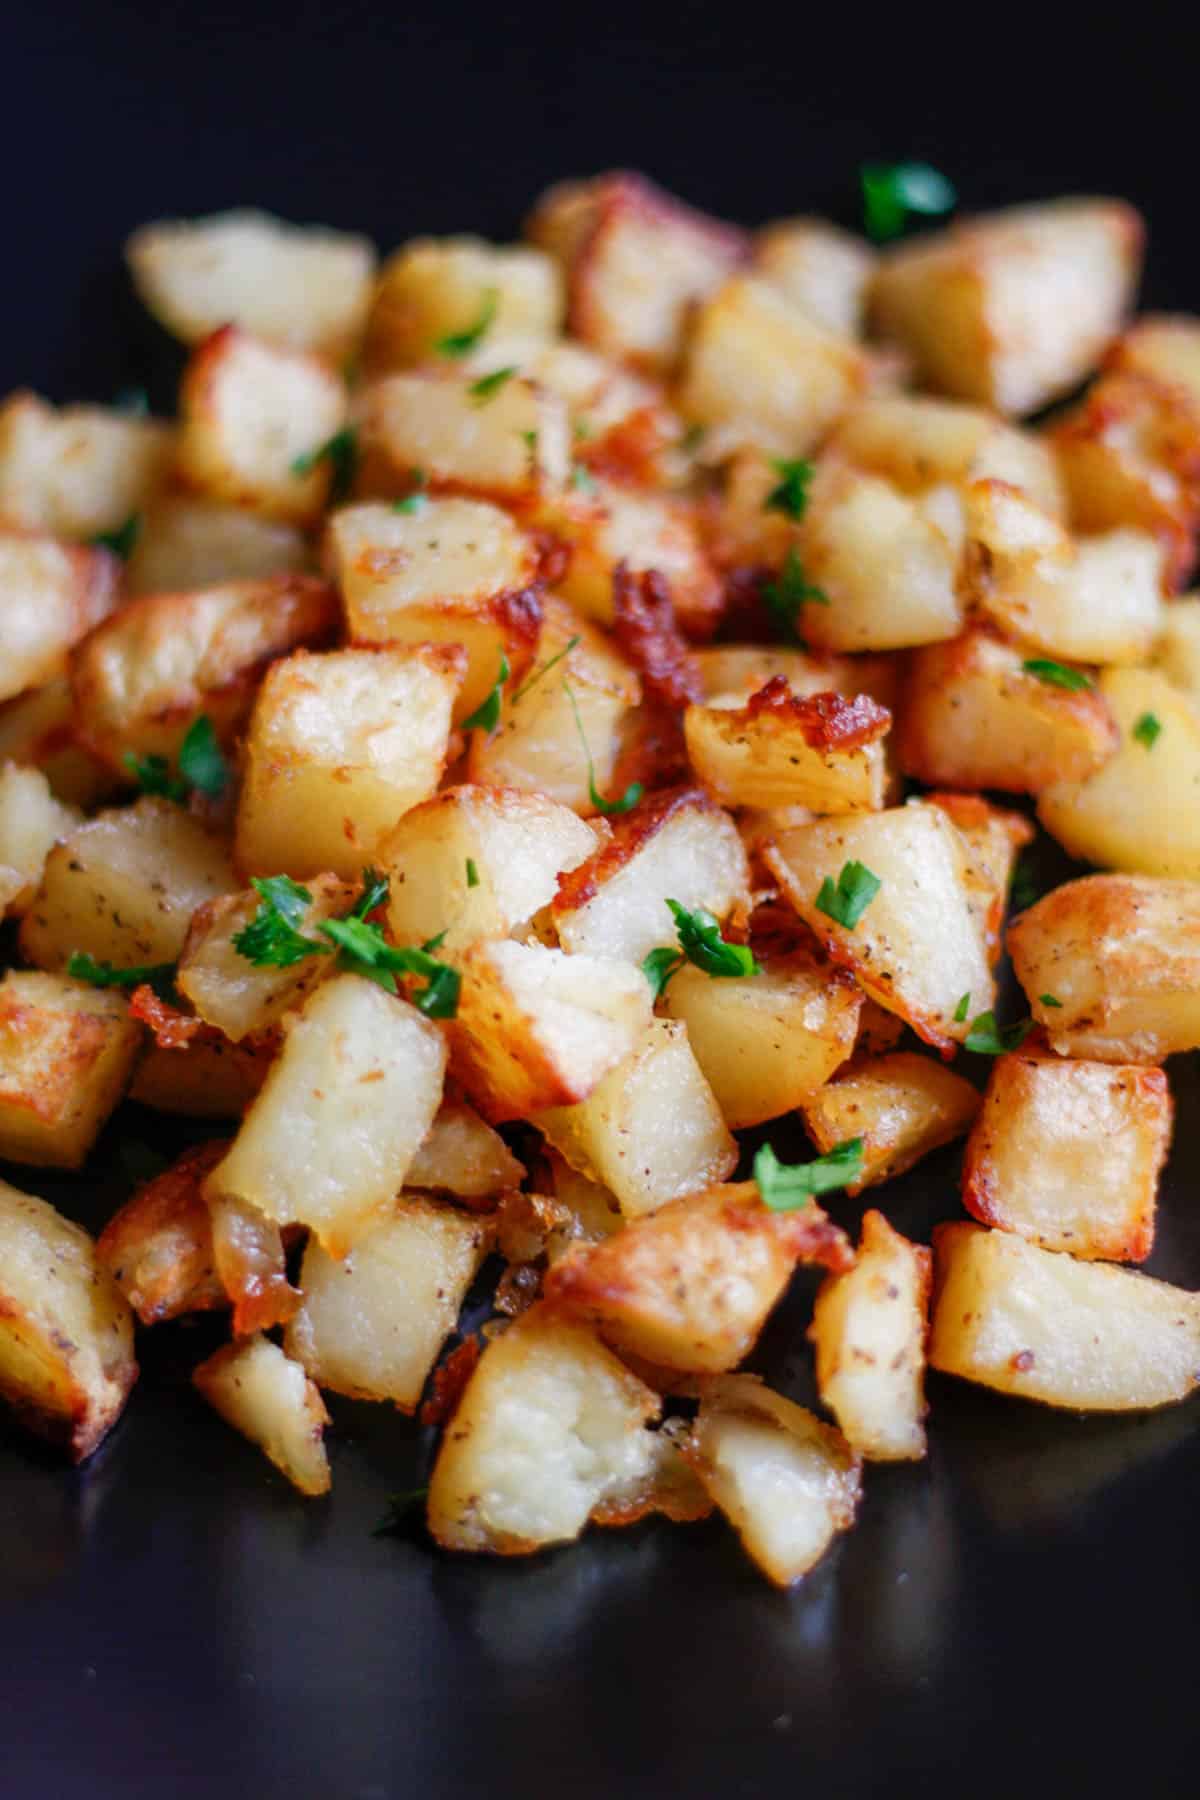 Crispy roasted potatoes garnished with minced parsley on a black plate.